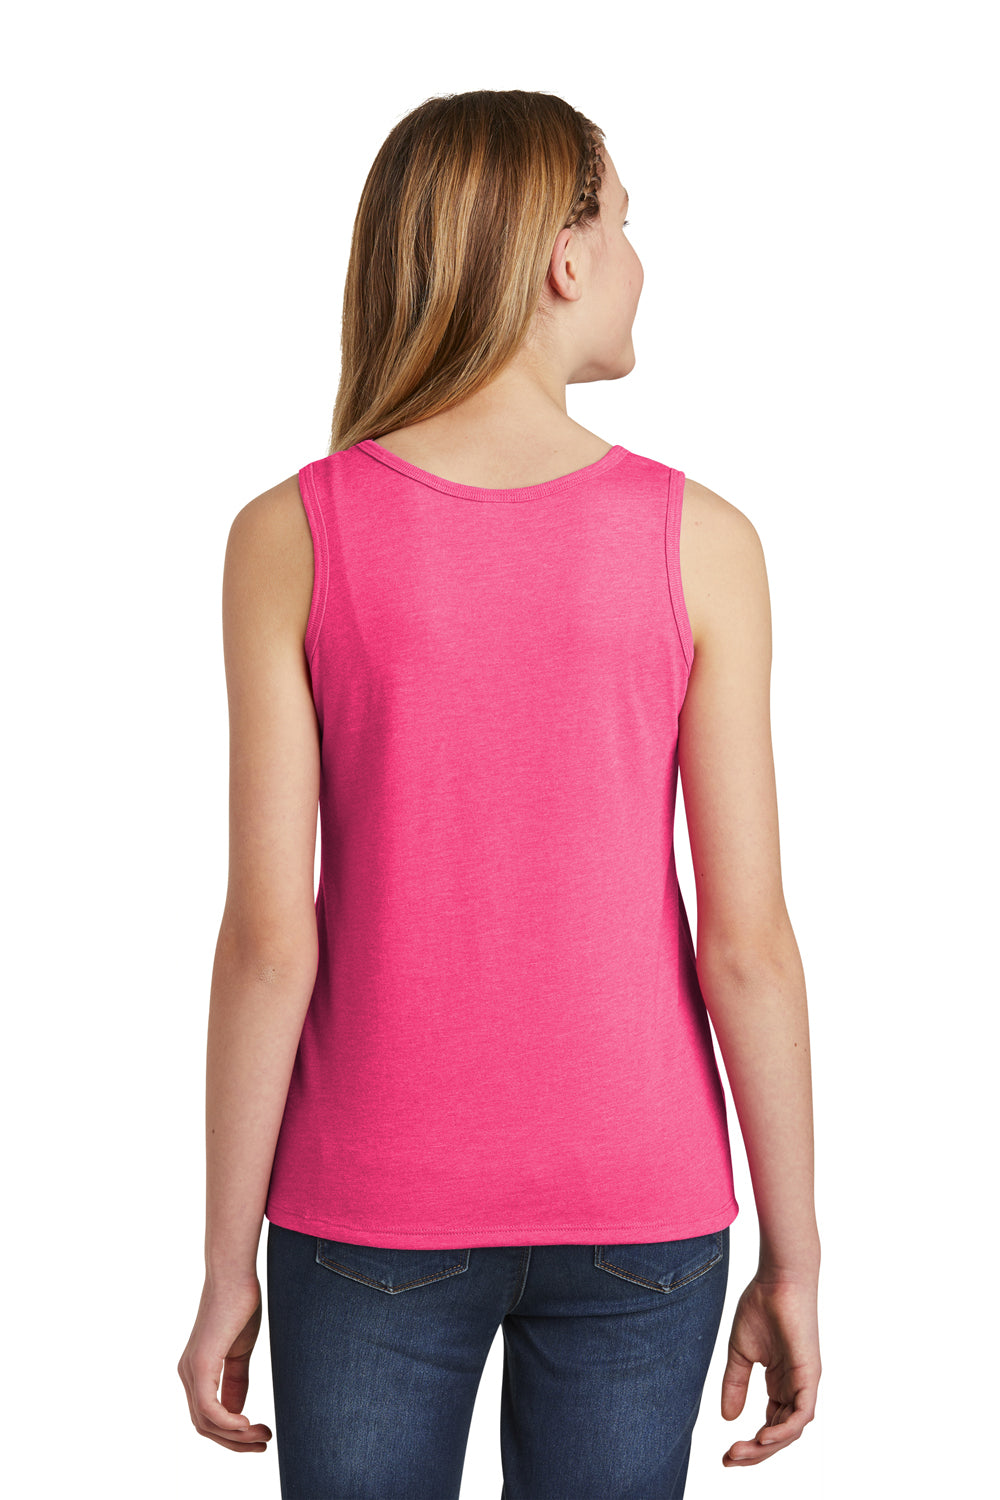 District DT6303YG Youth Very Important Tank Top Fuchsia Pink Back